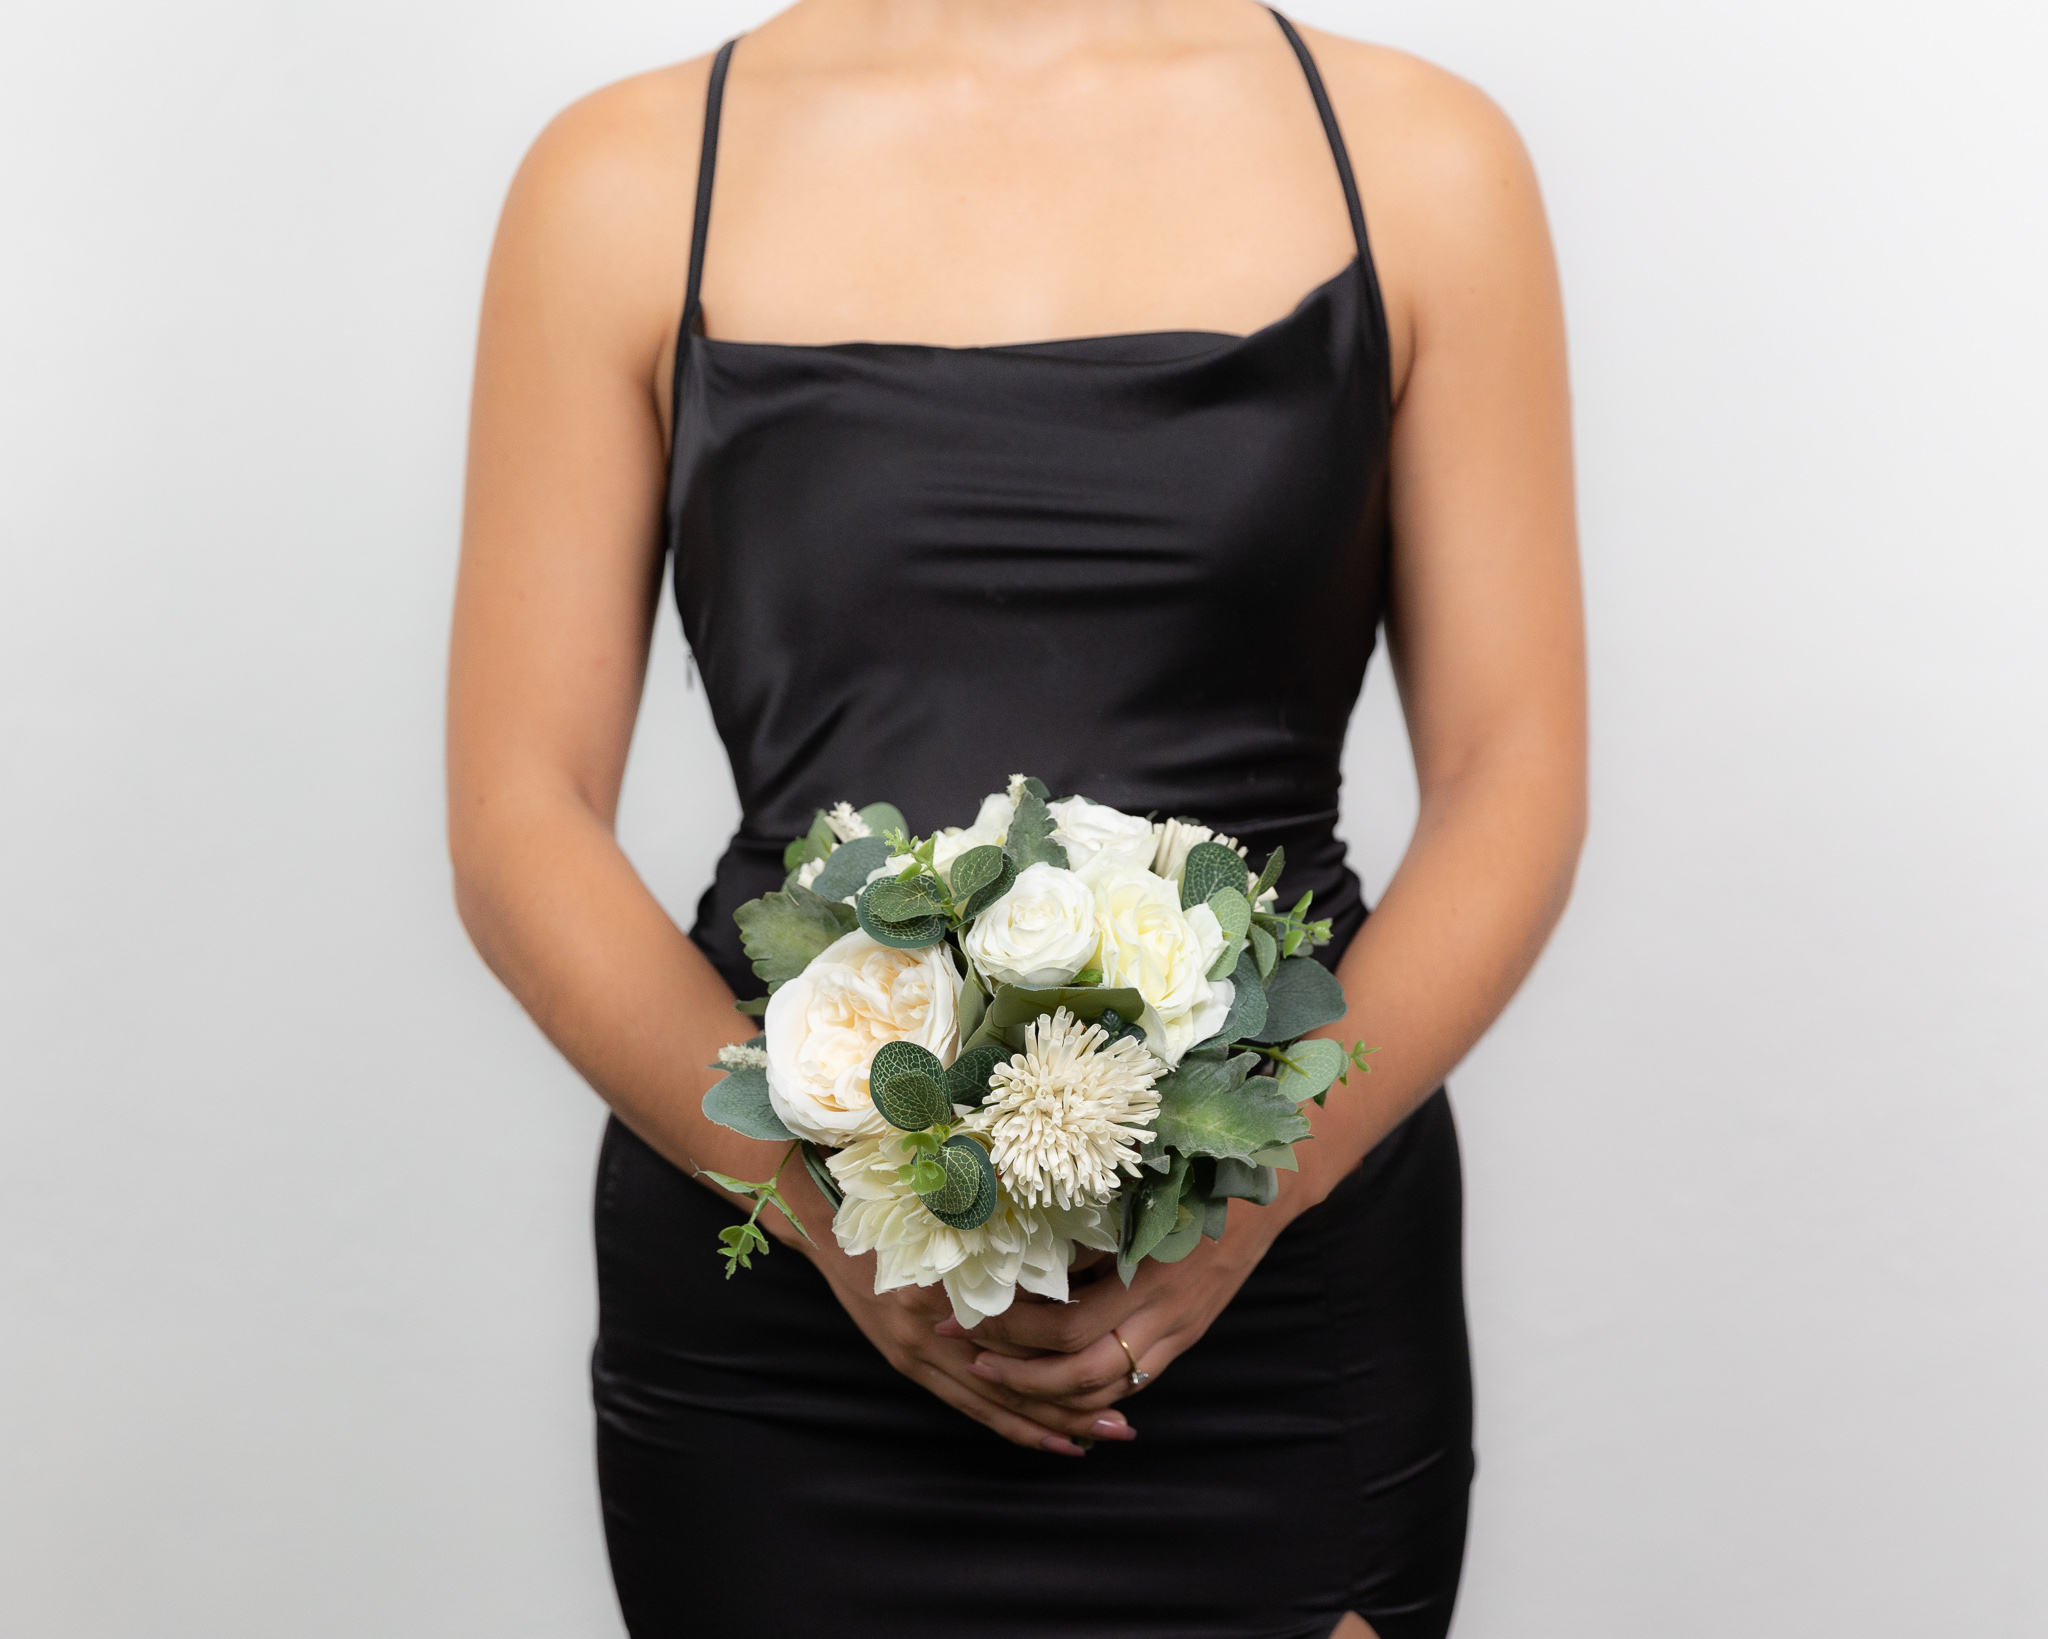 Classic bridesmaid bouquet white and green artificial flowers